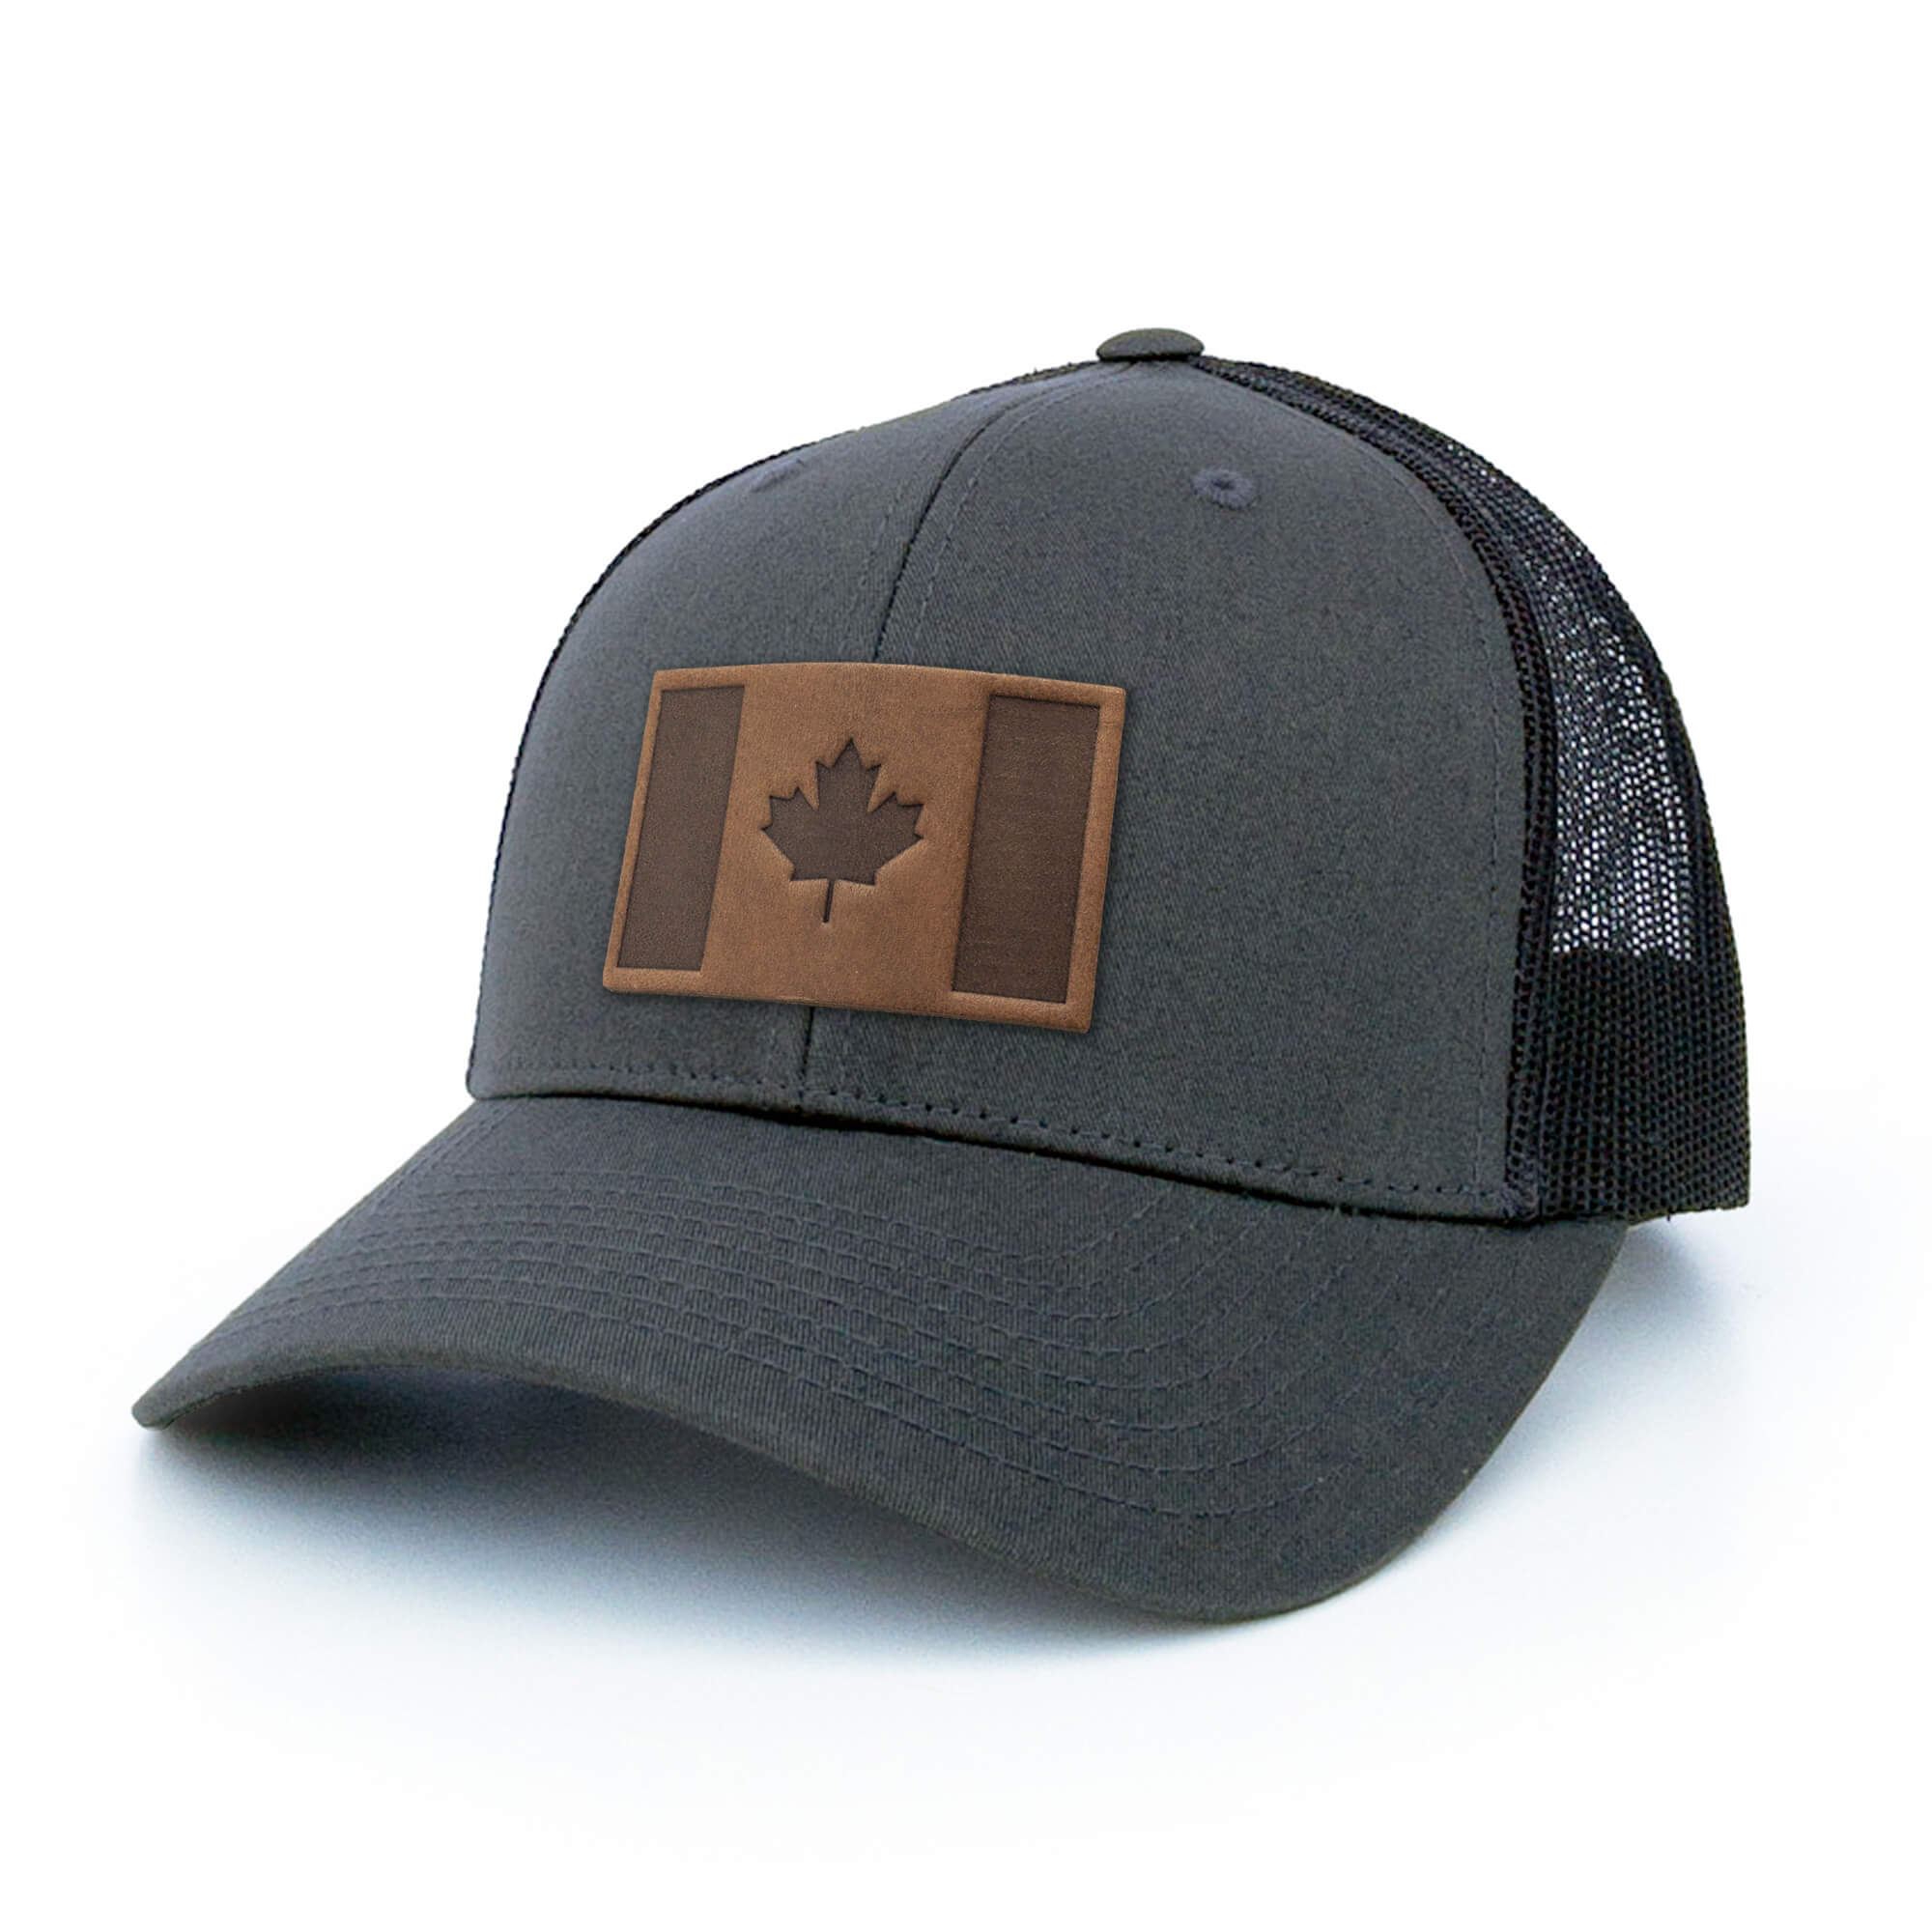 Canada Flag Leather Patch Hat, Navy - Trucker Hat, Made in Canada with Full-Grain Leather